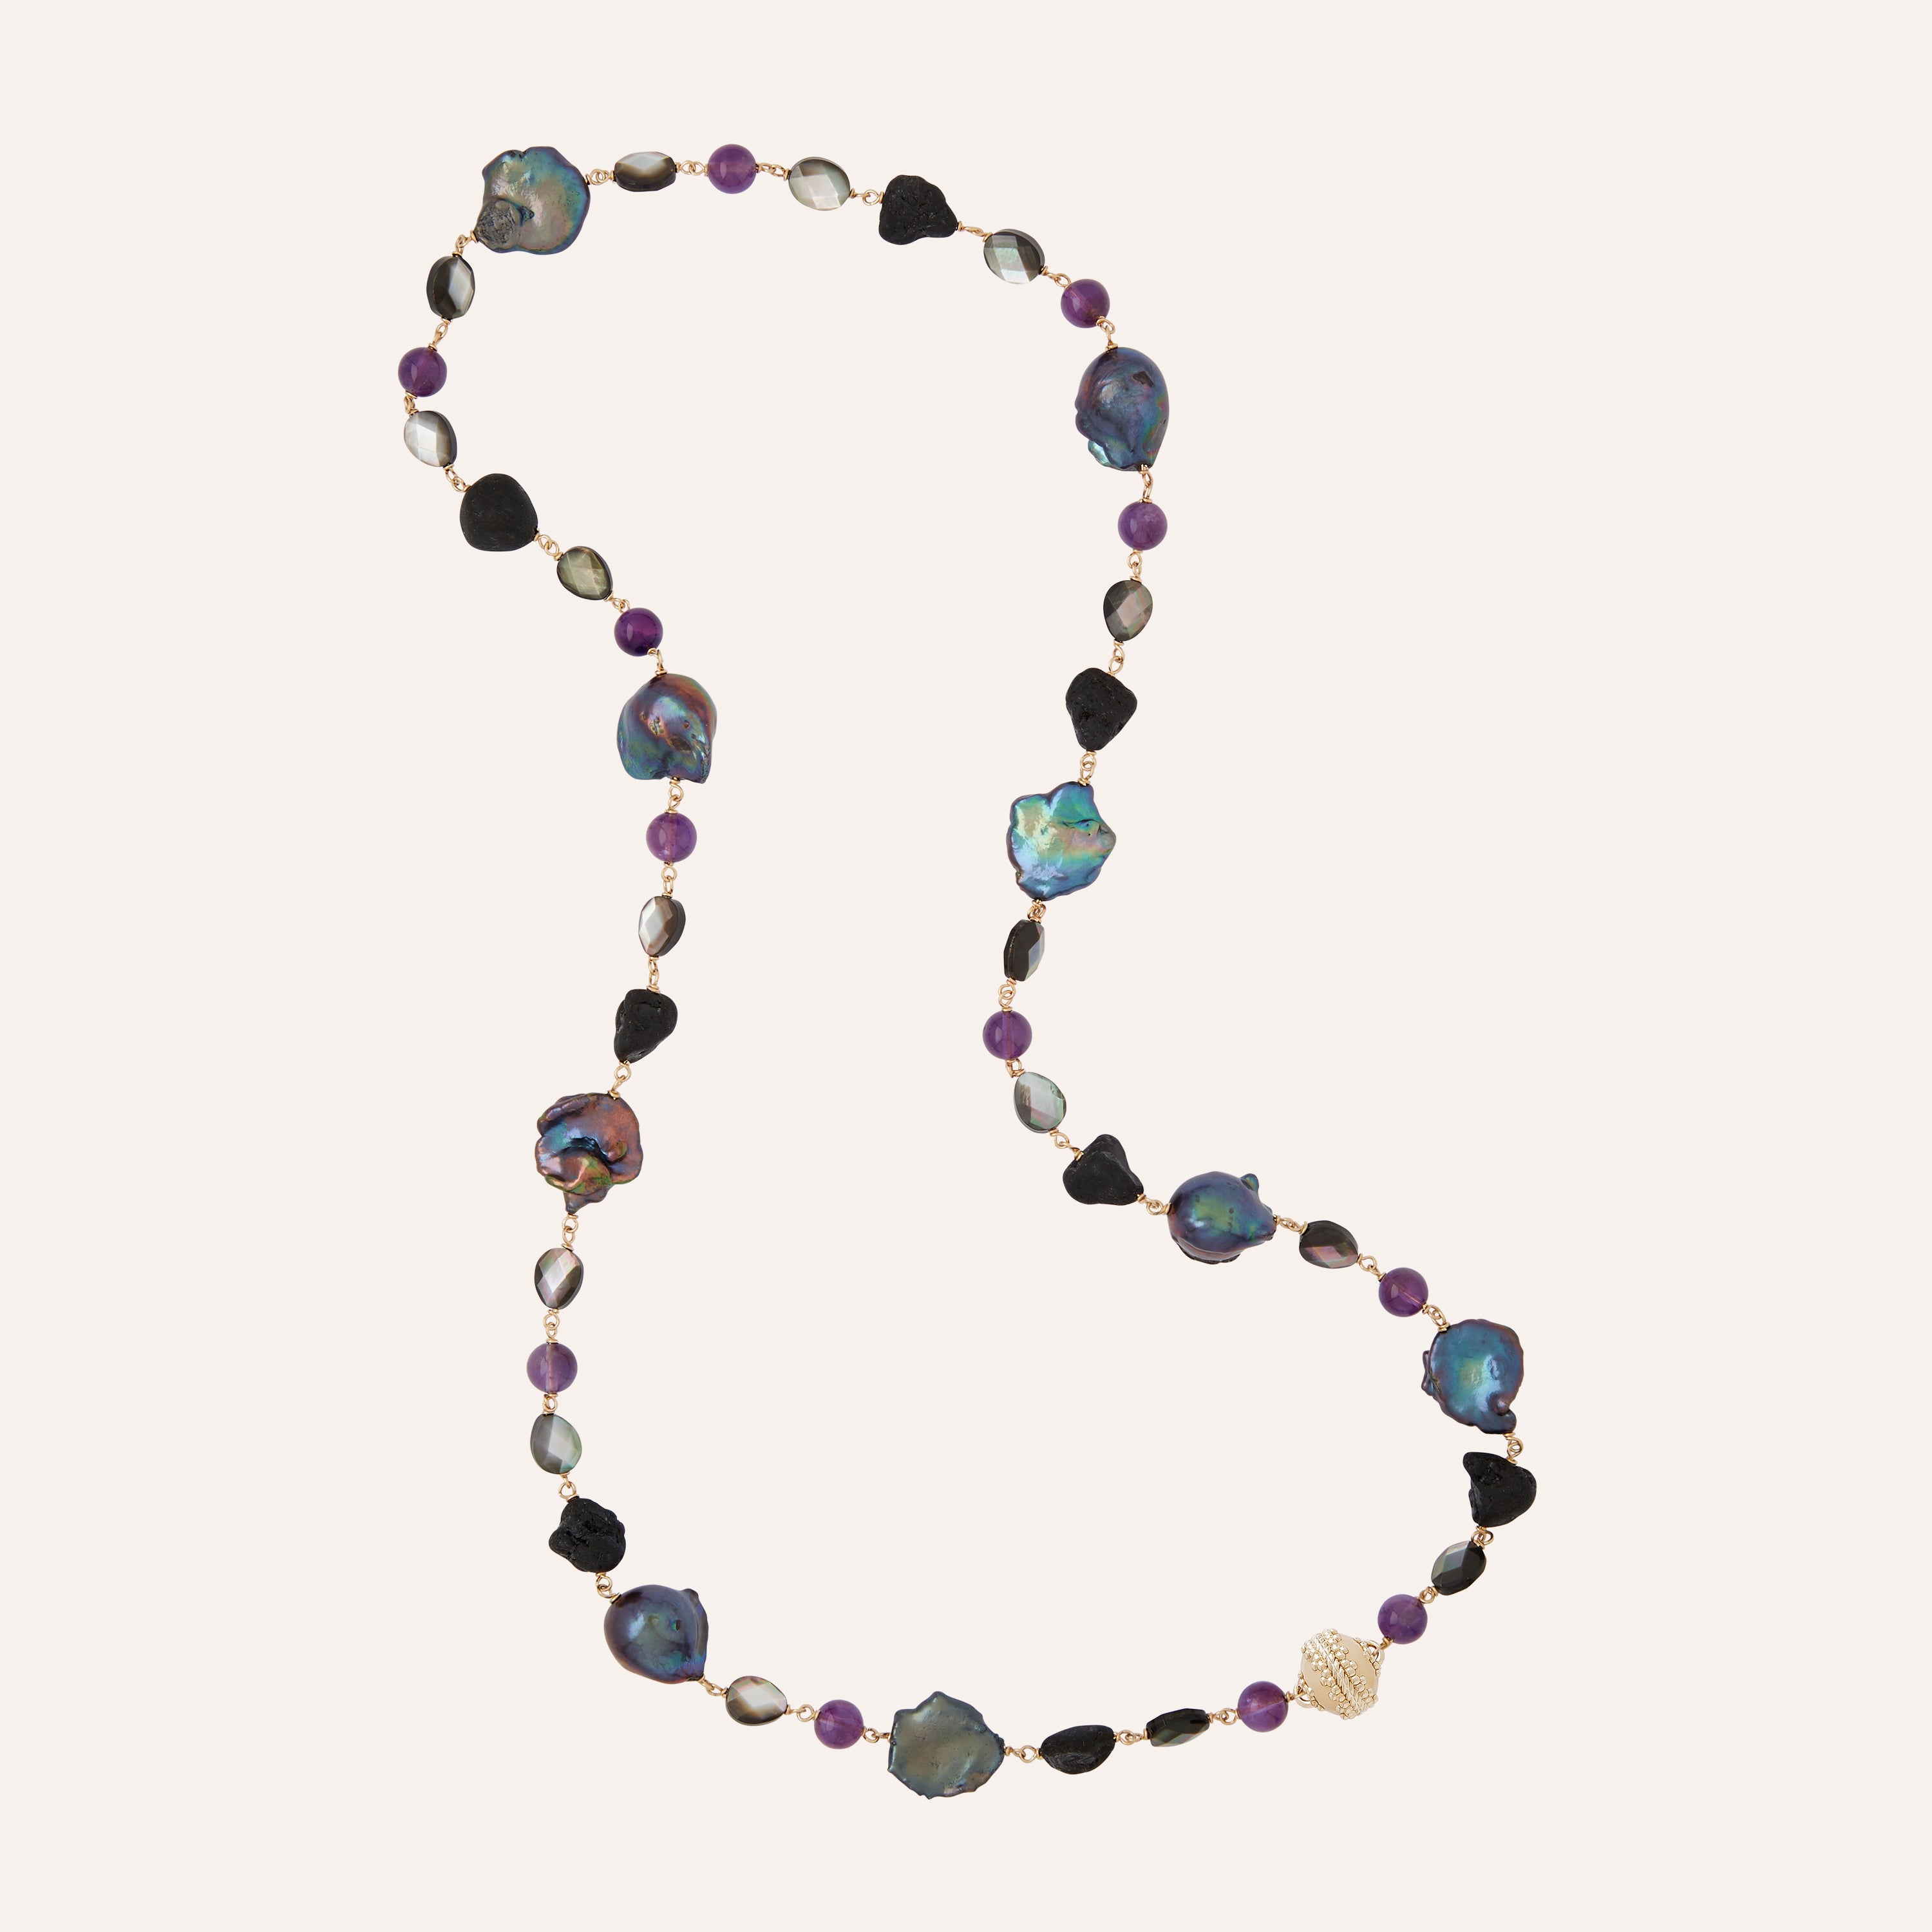 Caspian Amethyst, Tourmaline, and Freshwater Pearl Necklace